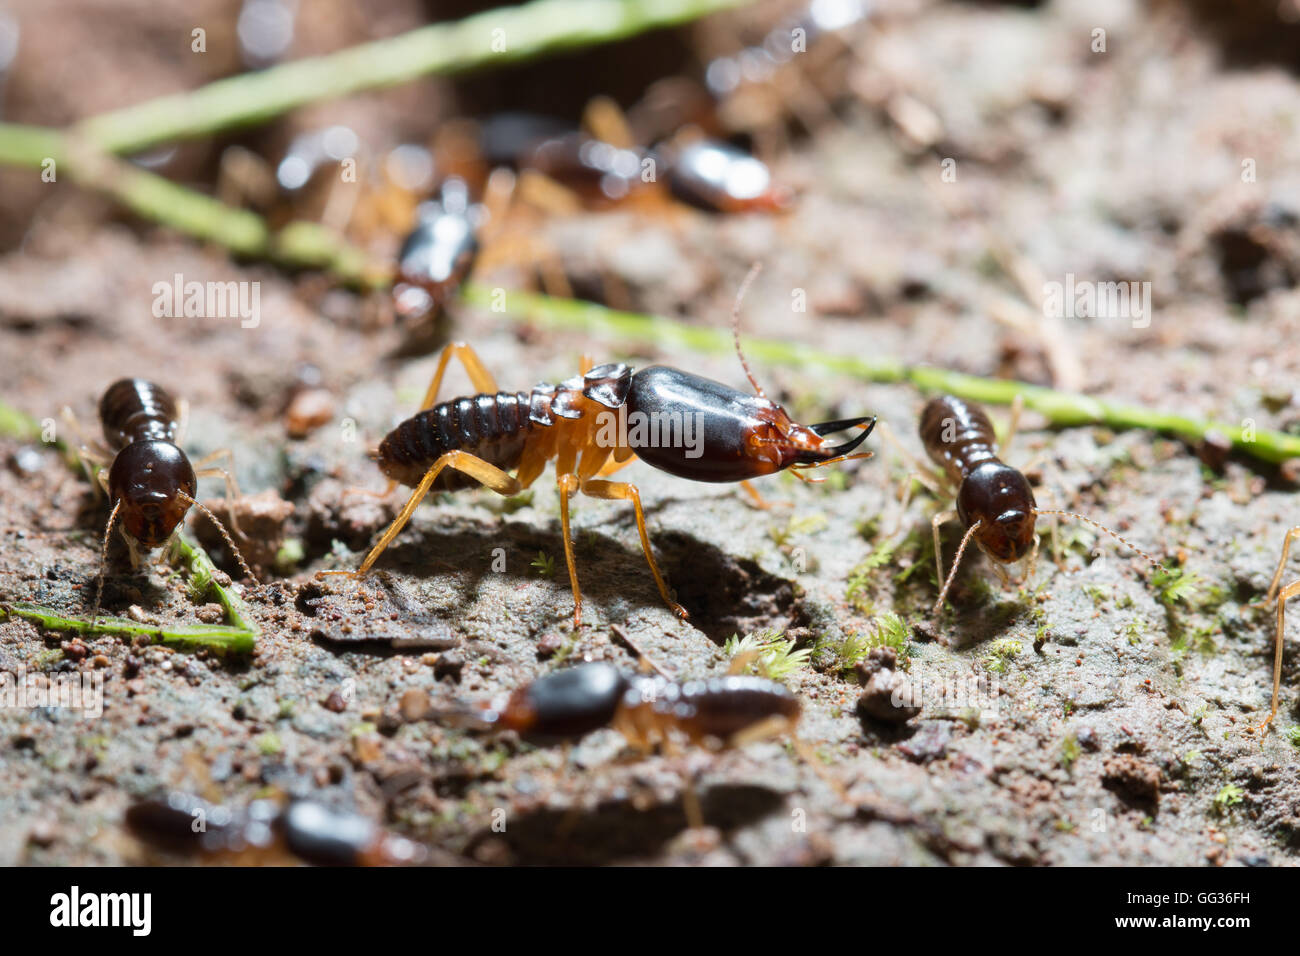 security soldier termites with worker termites on the forest floor in Saraburi thailand. Shallow DOF Stock Photo